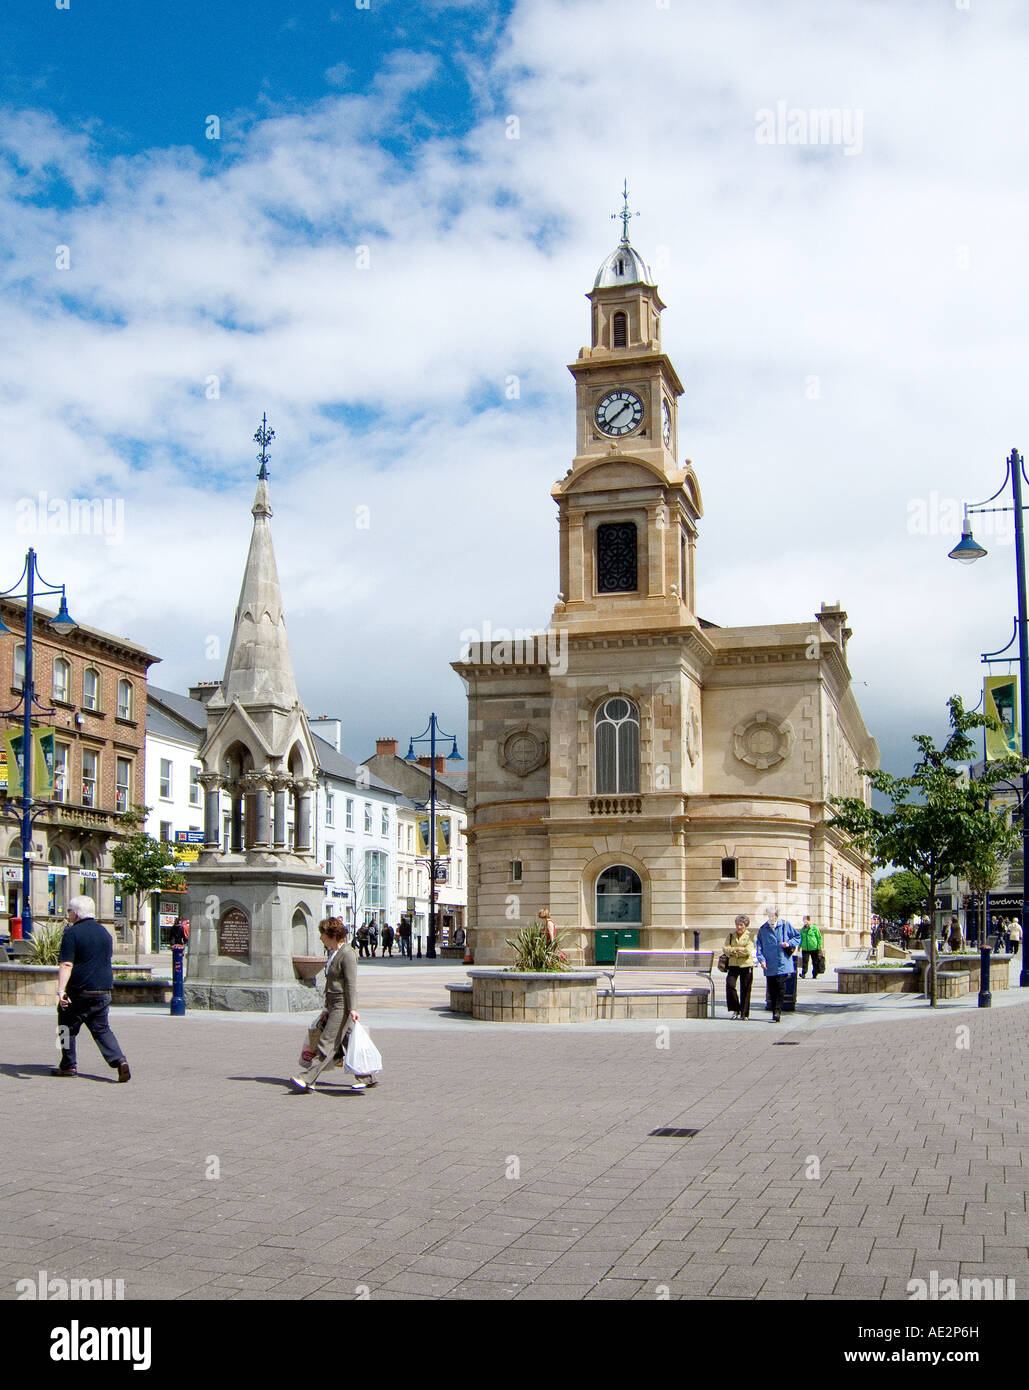 Market town of Coleraine, County Derry Londonderry Ireland. The Town Hall dating from 1743 in the town centre. Stock Photo